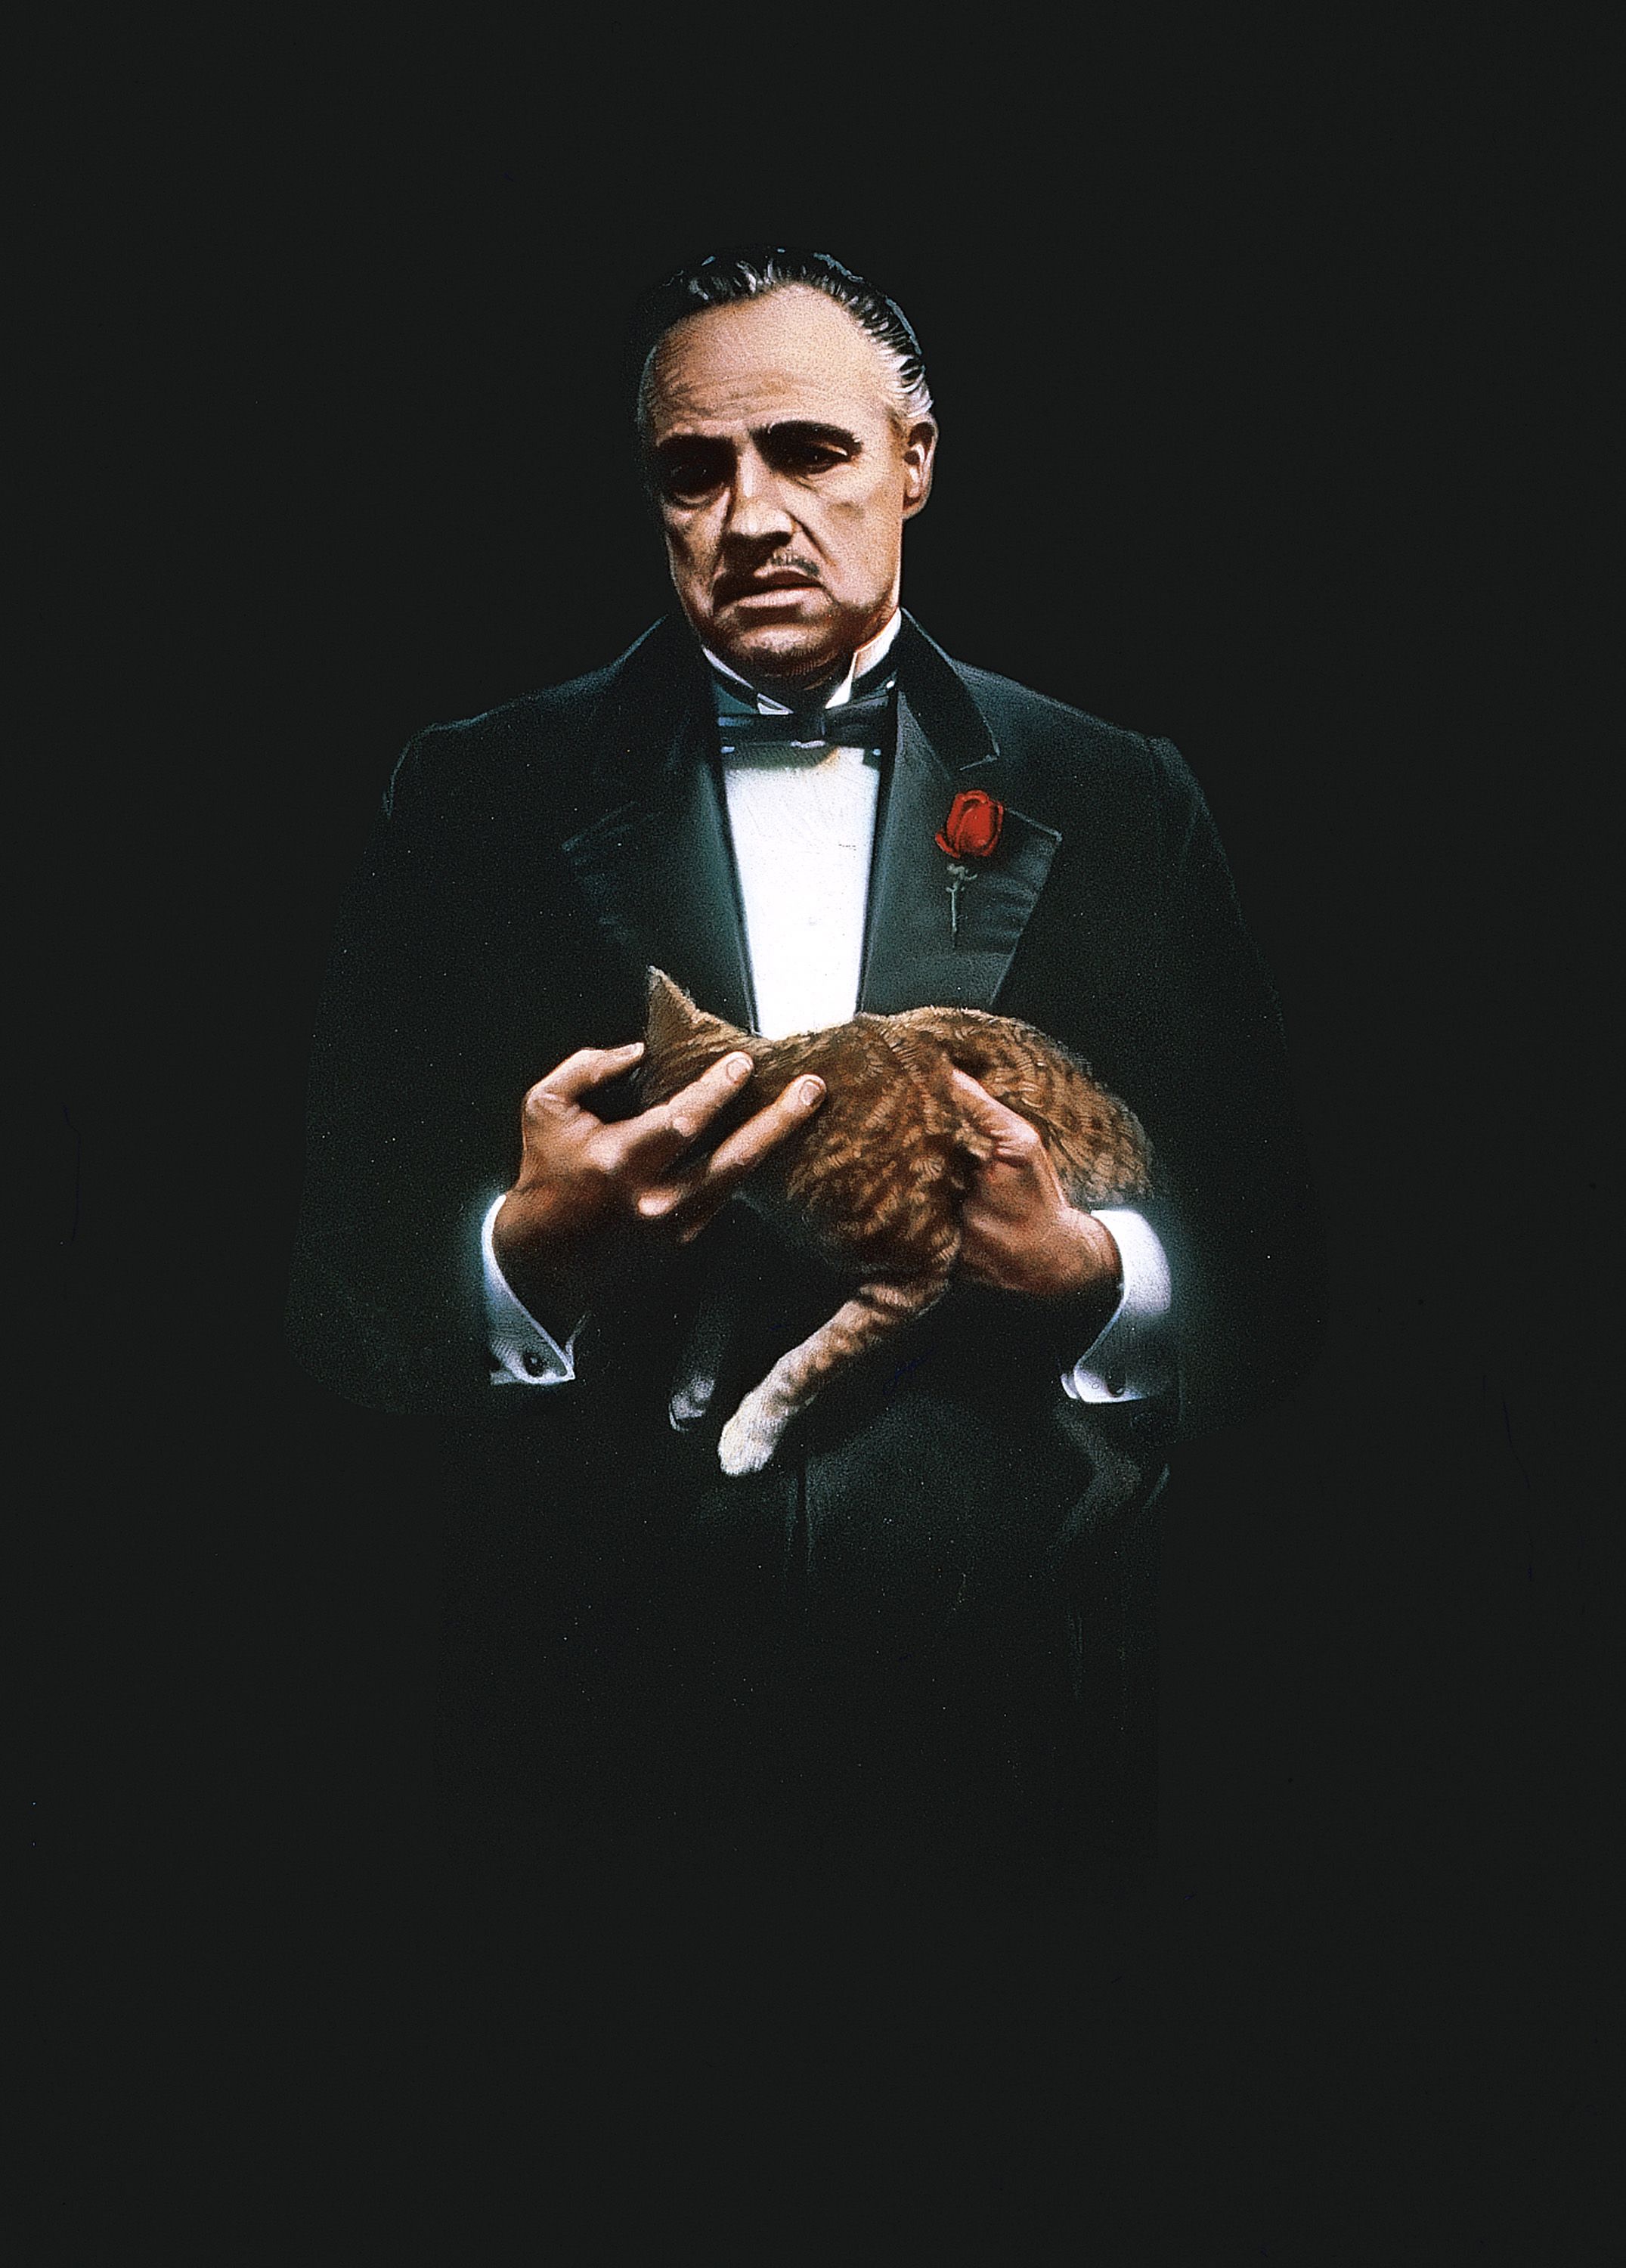 the godfather pc background